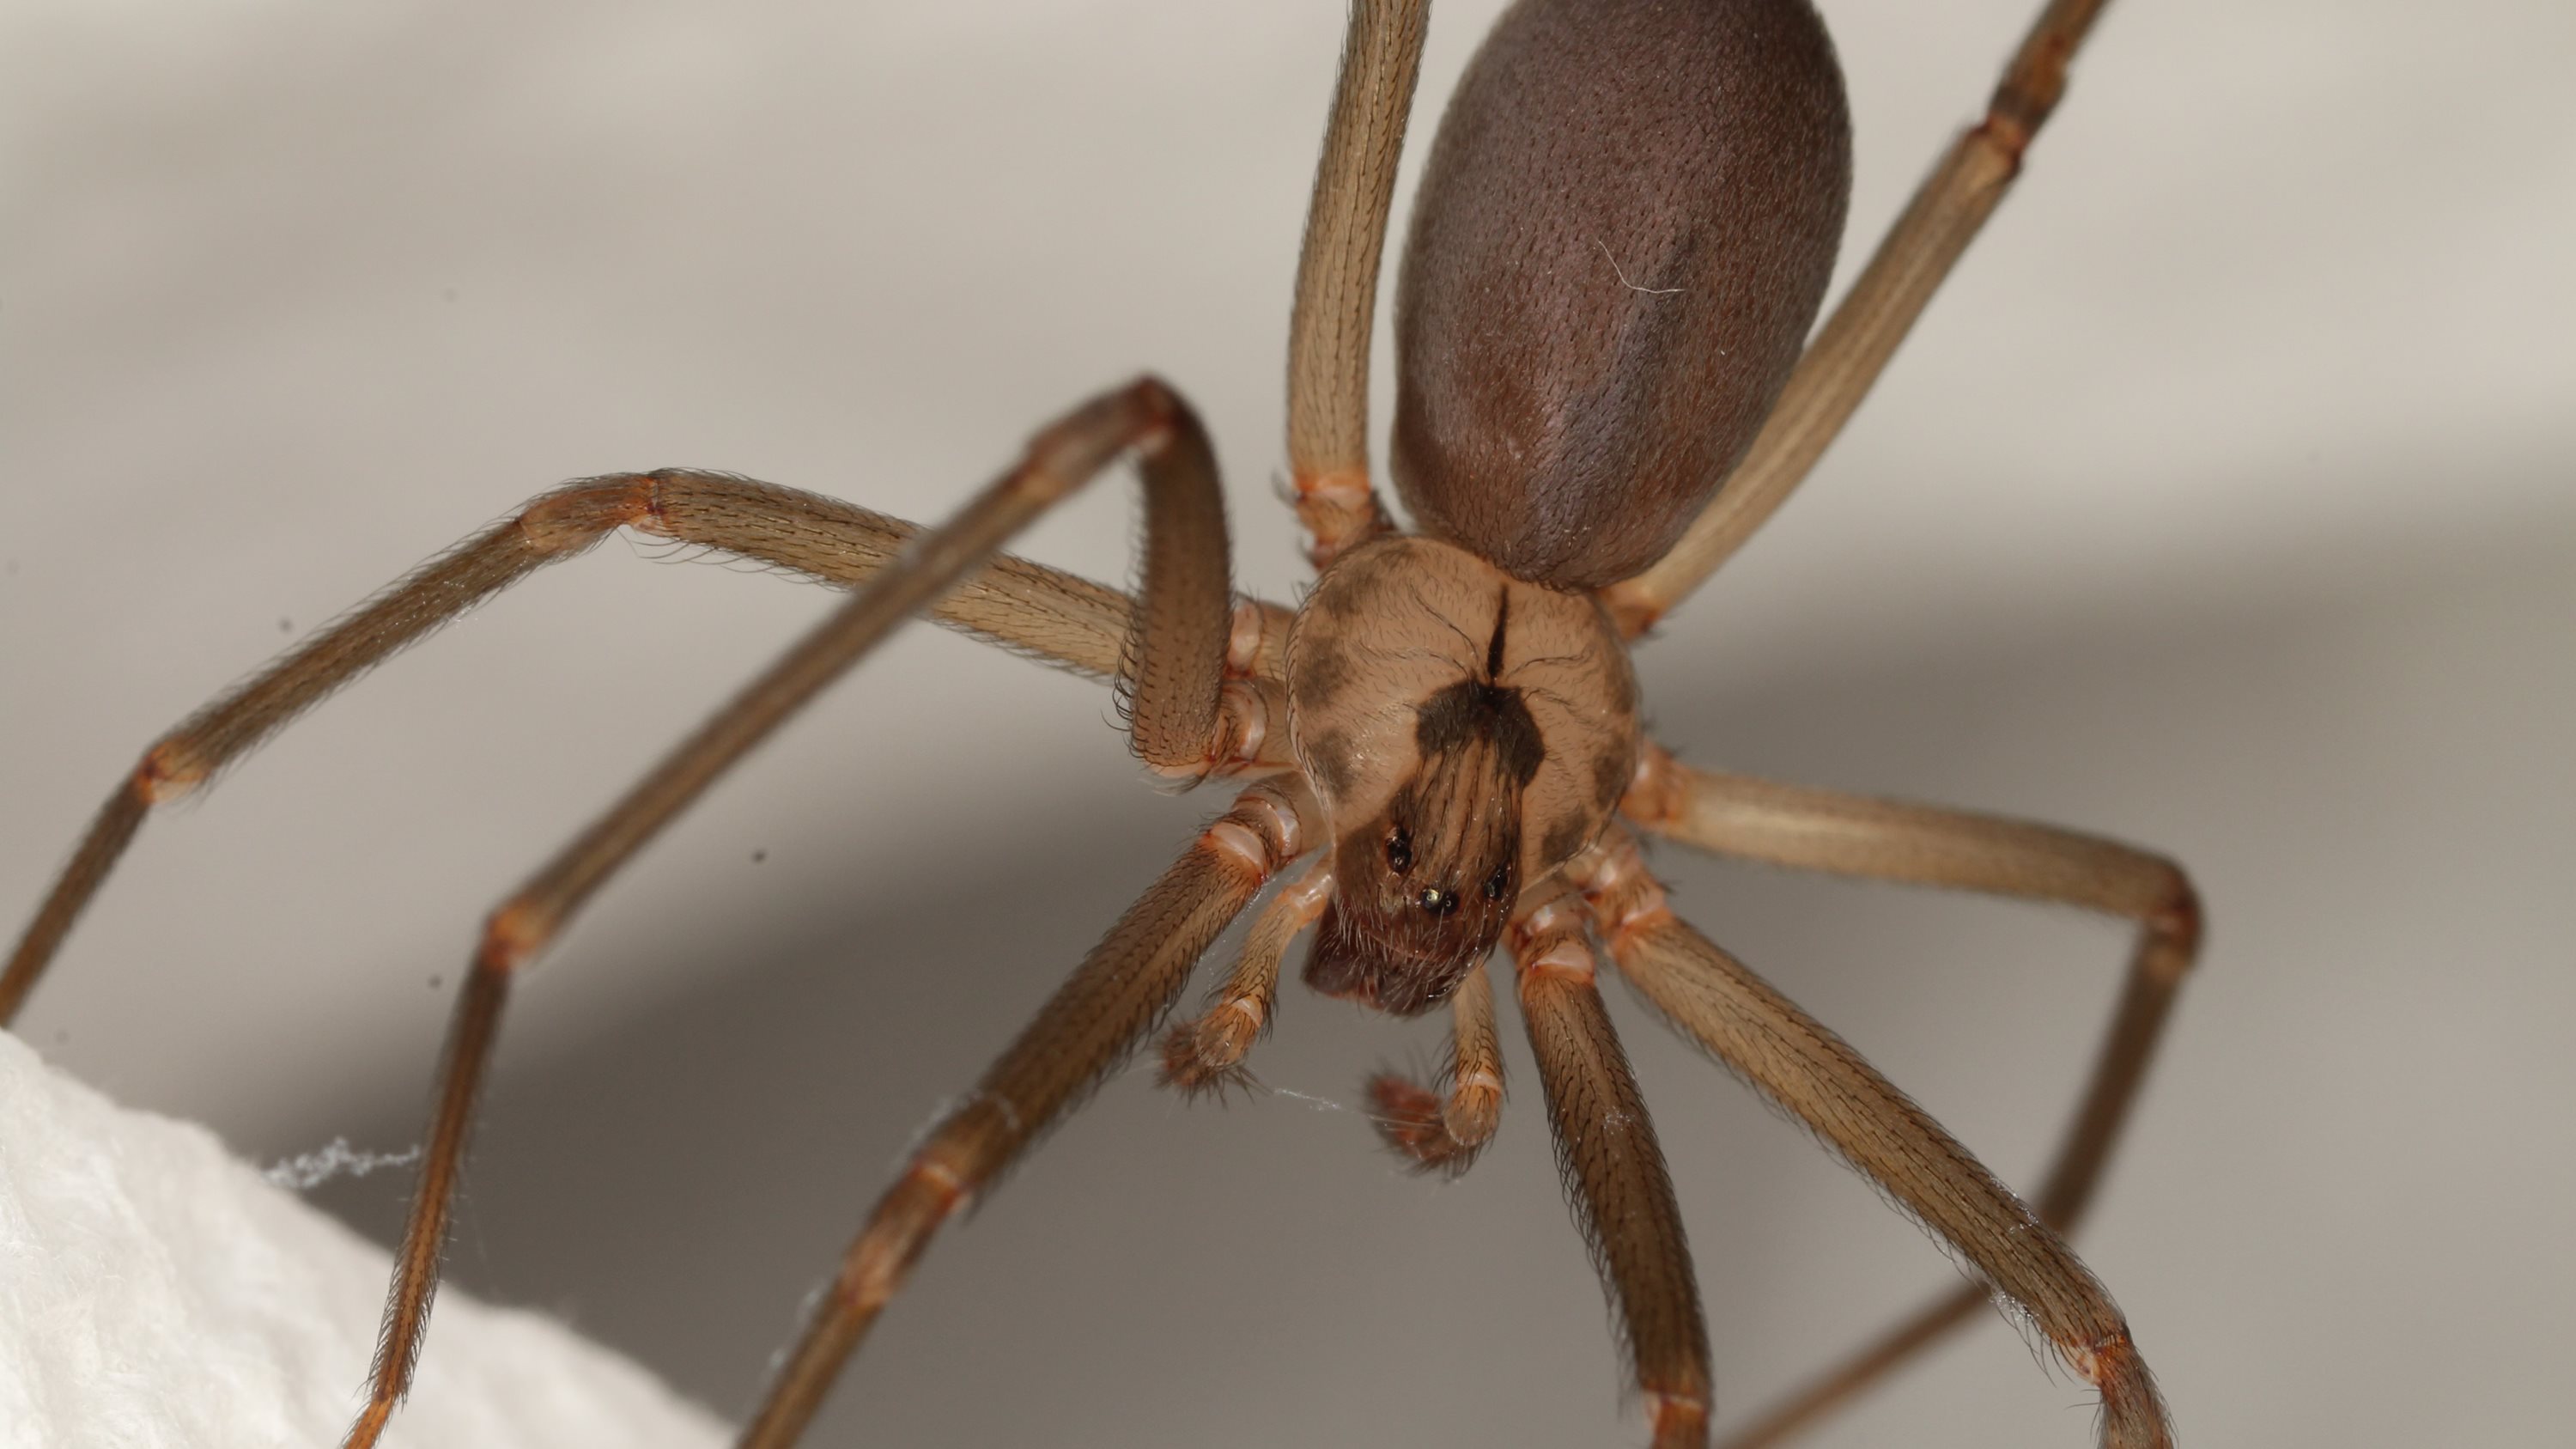 Close-up view of the violin shape on a brown recluse spider.